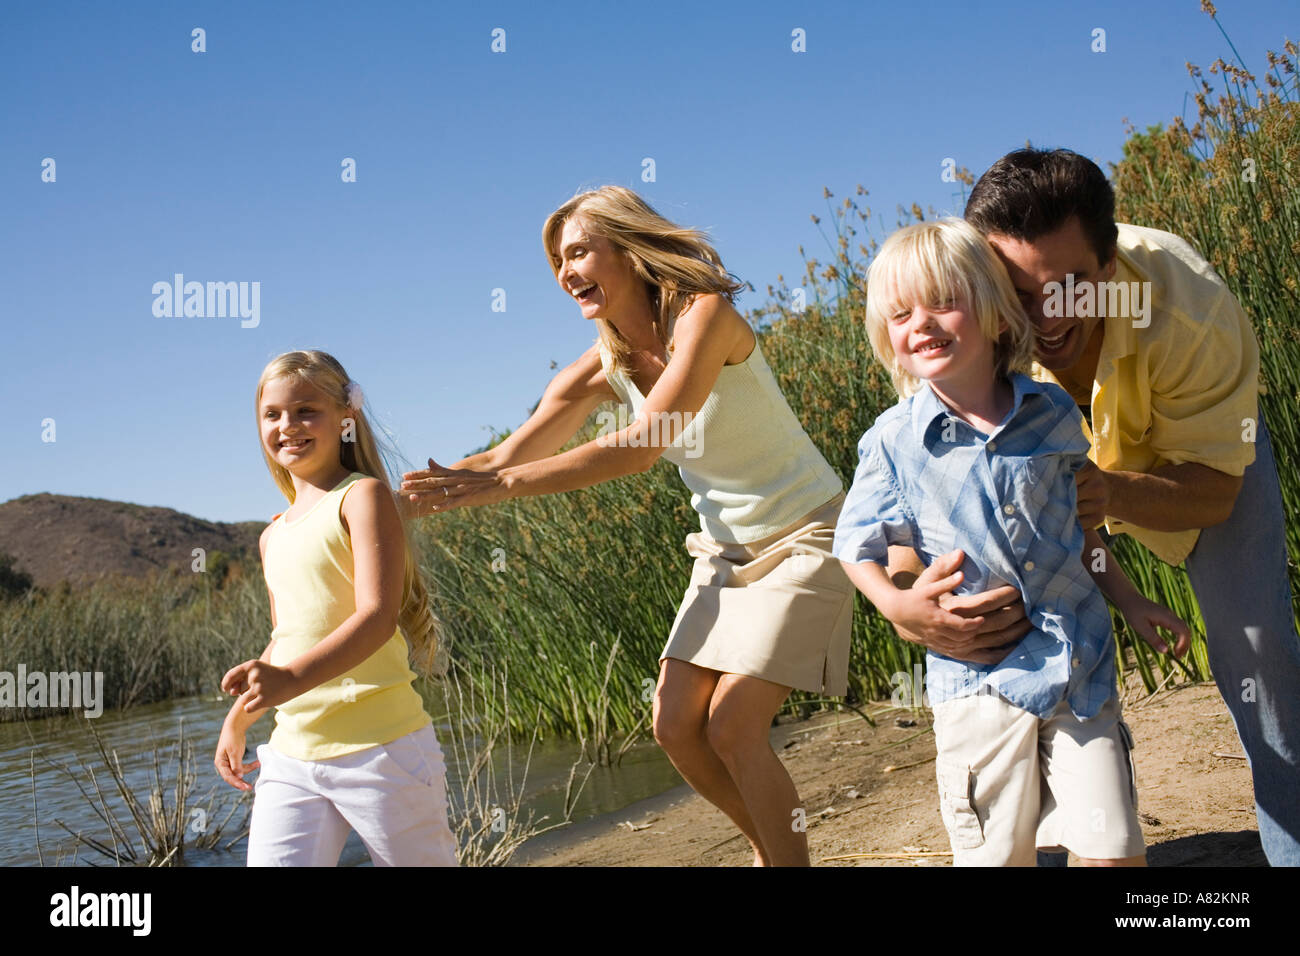 A family playing by a lake Stock Photo